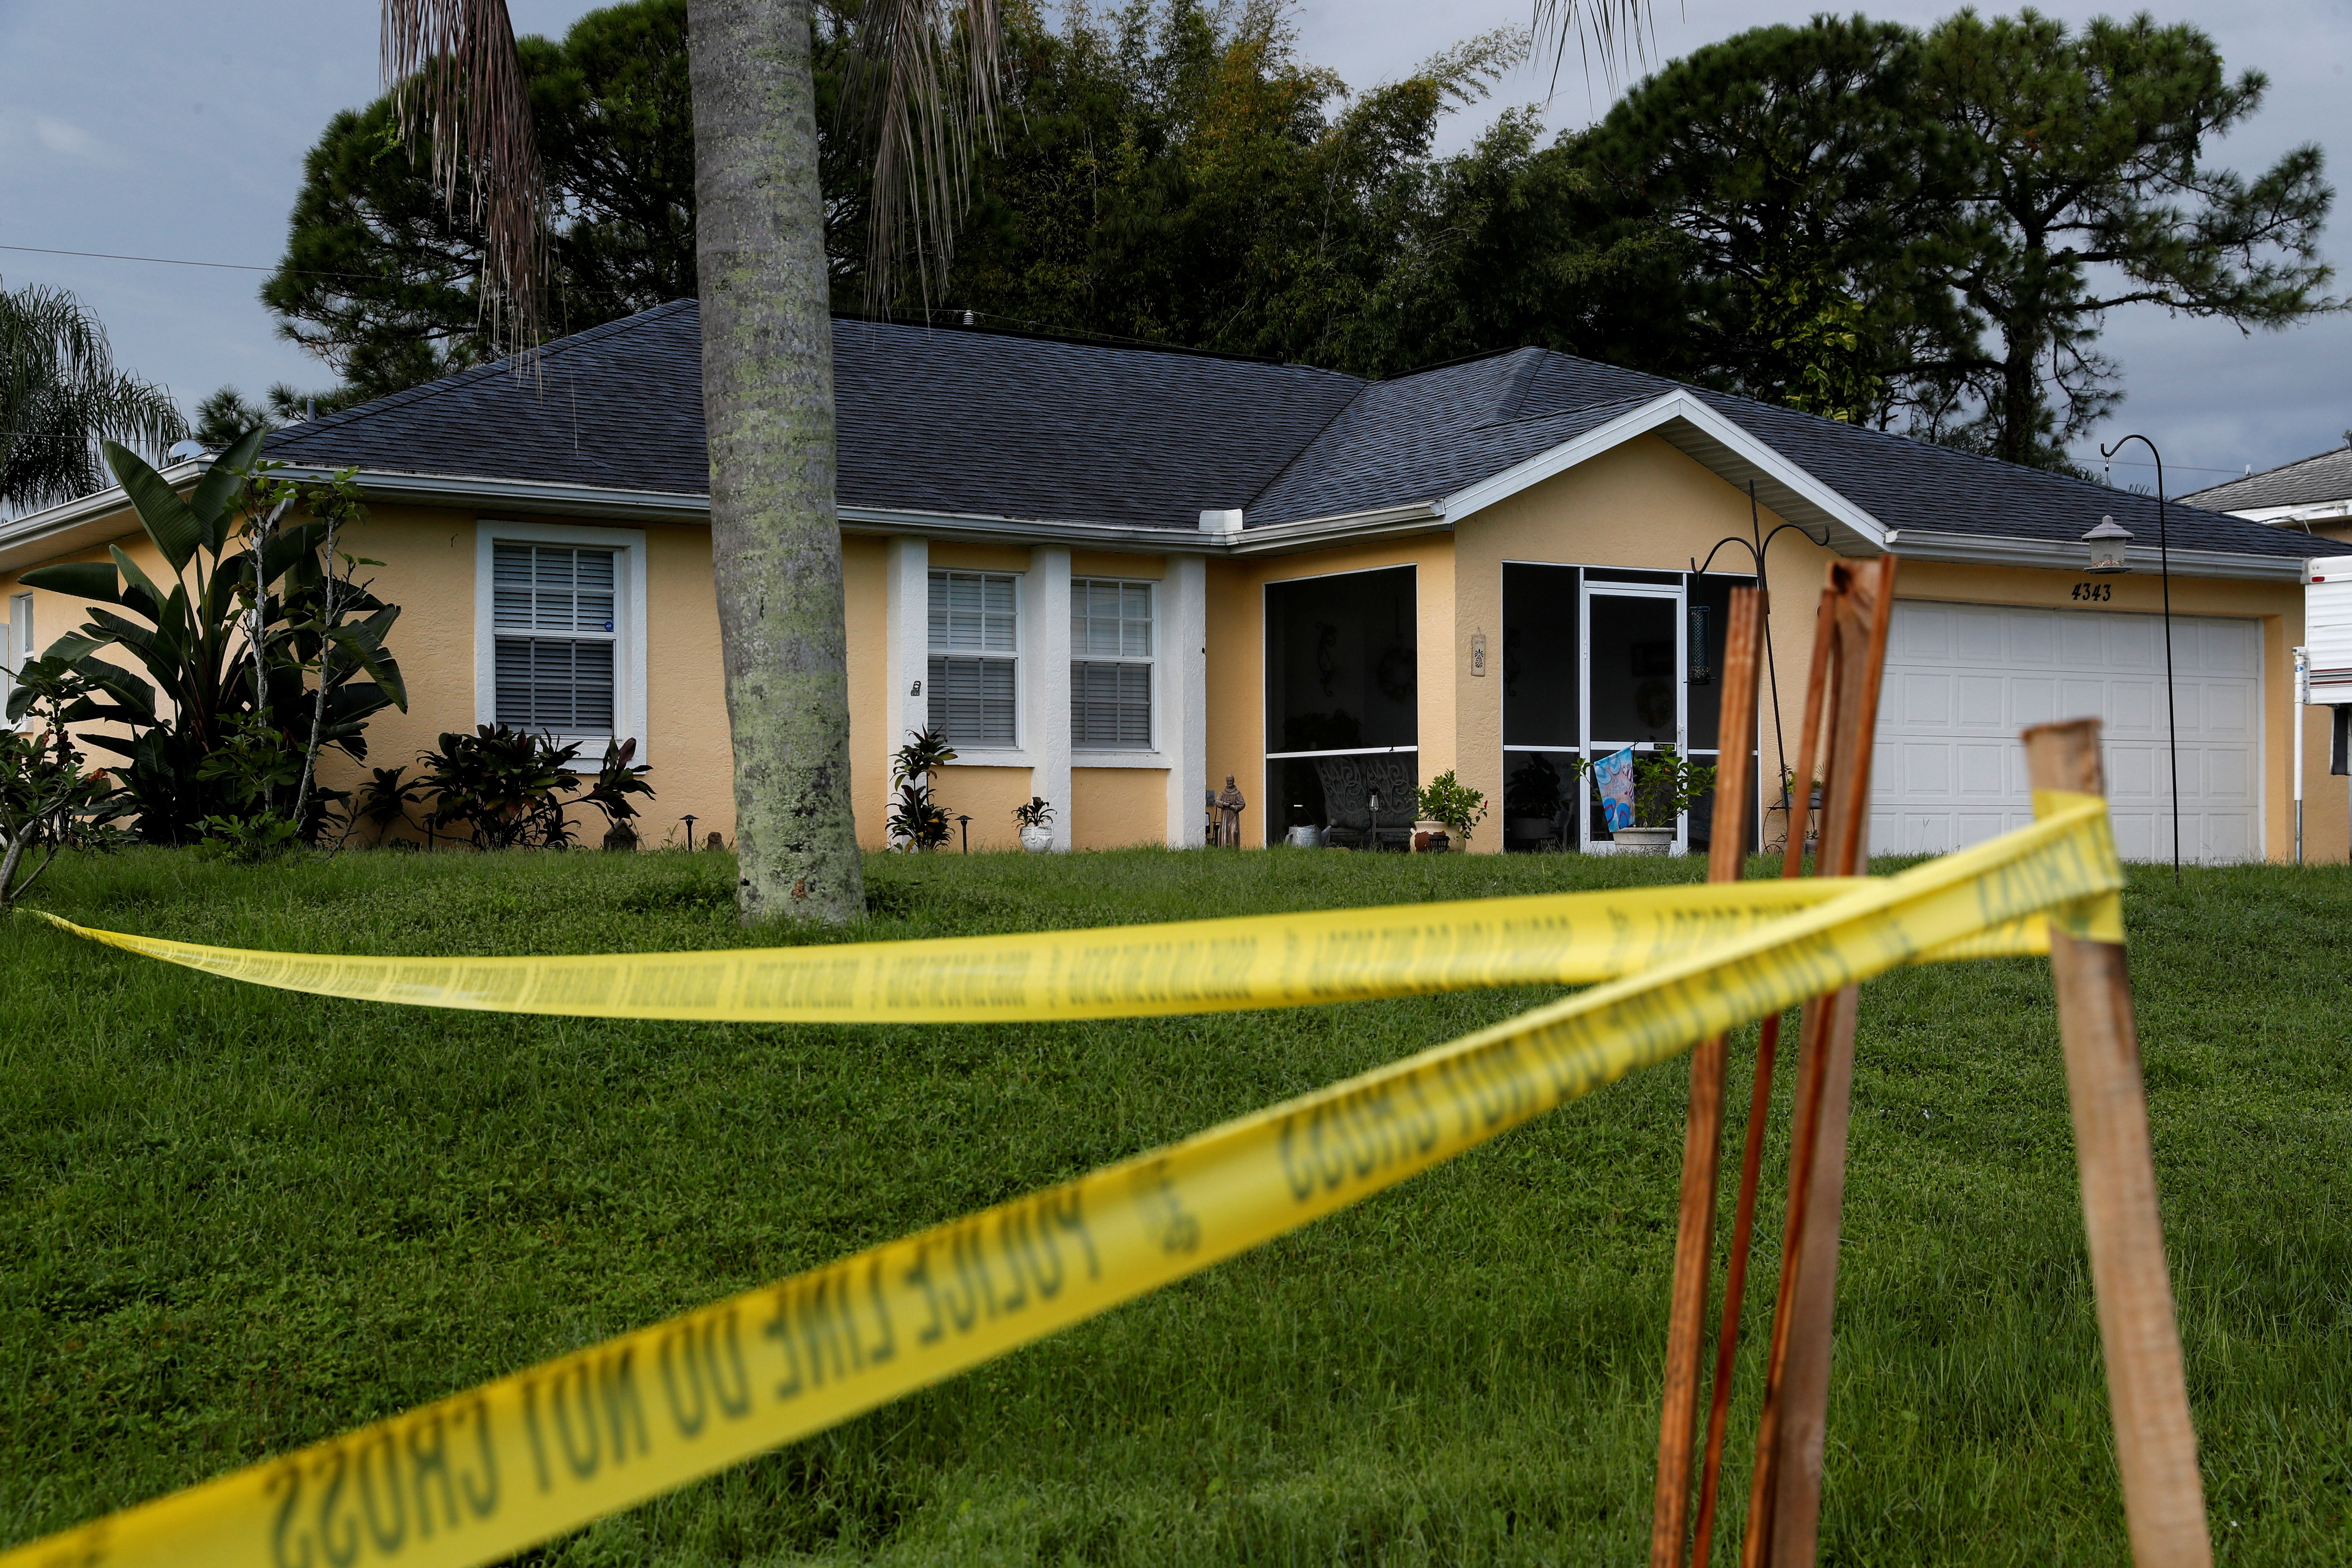 Police tape is seen outside the family home of Brian Laundrie, in North Port, Florida